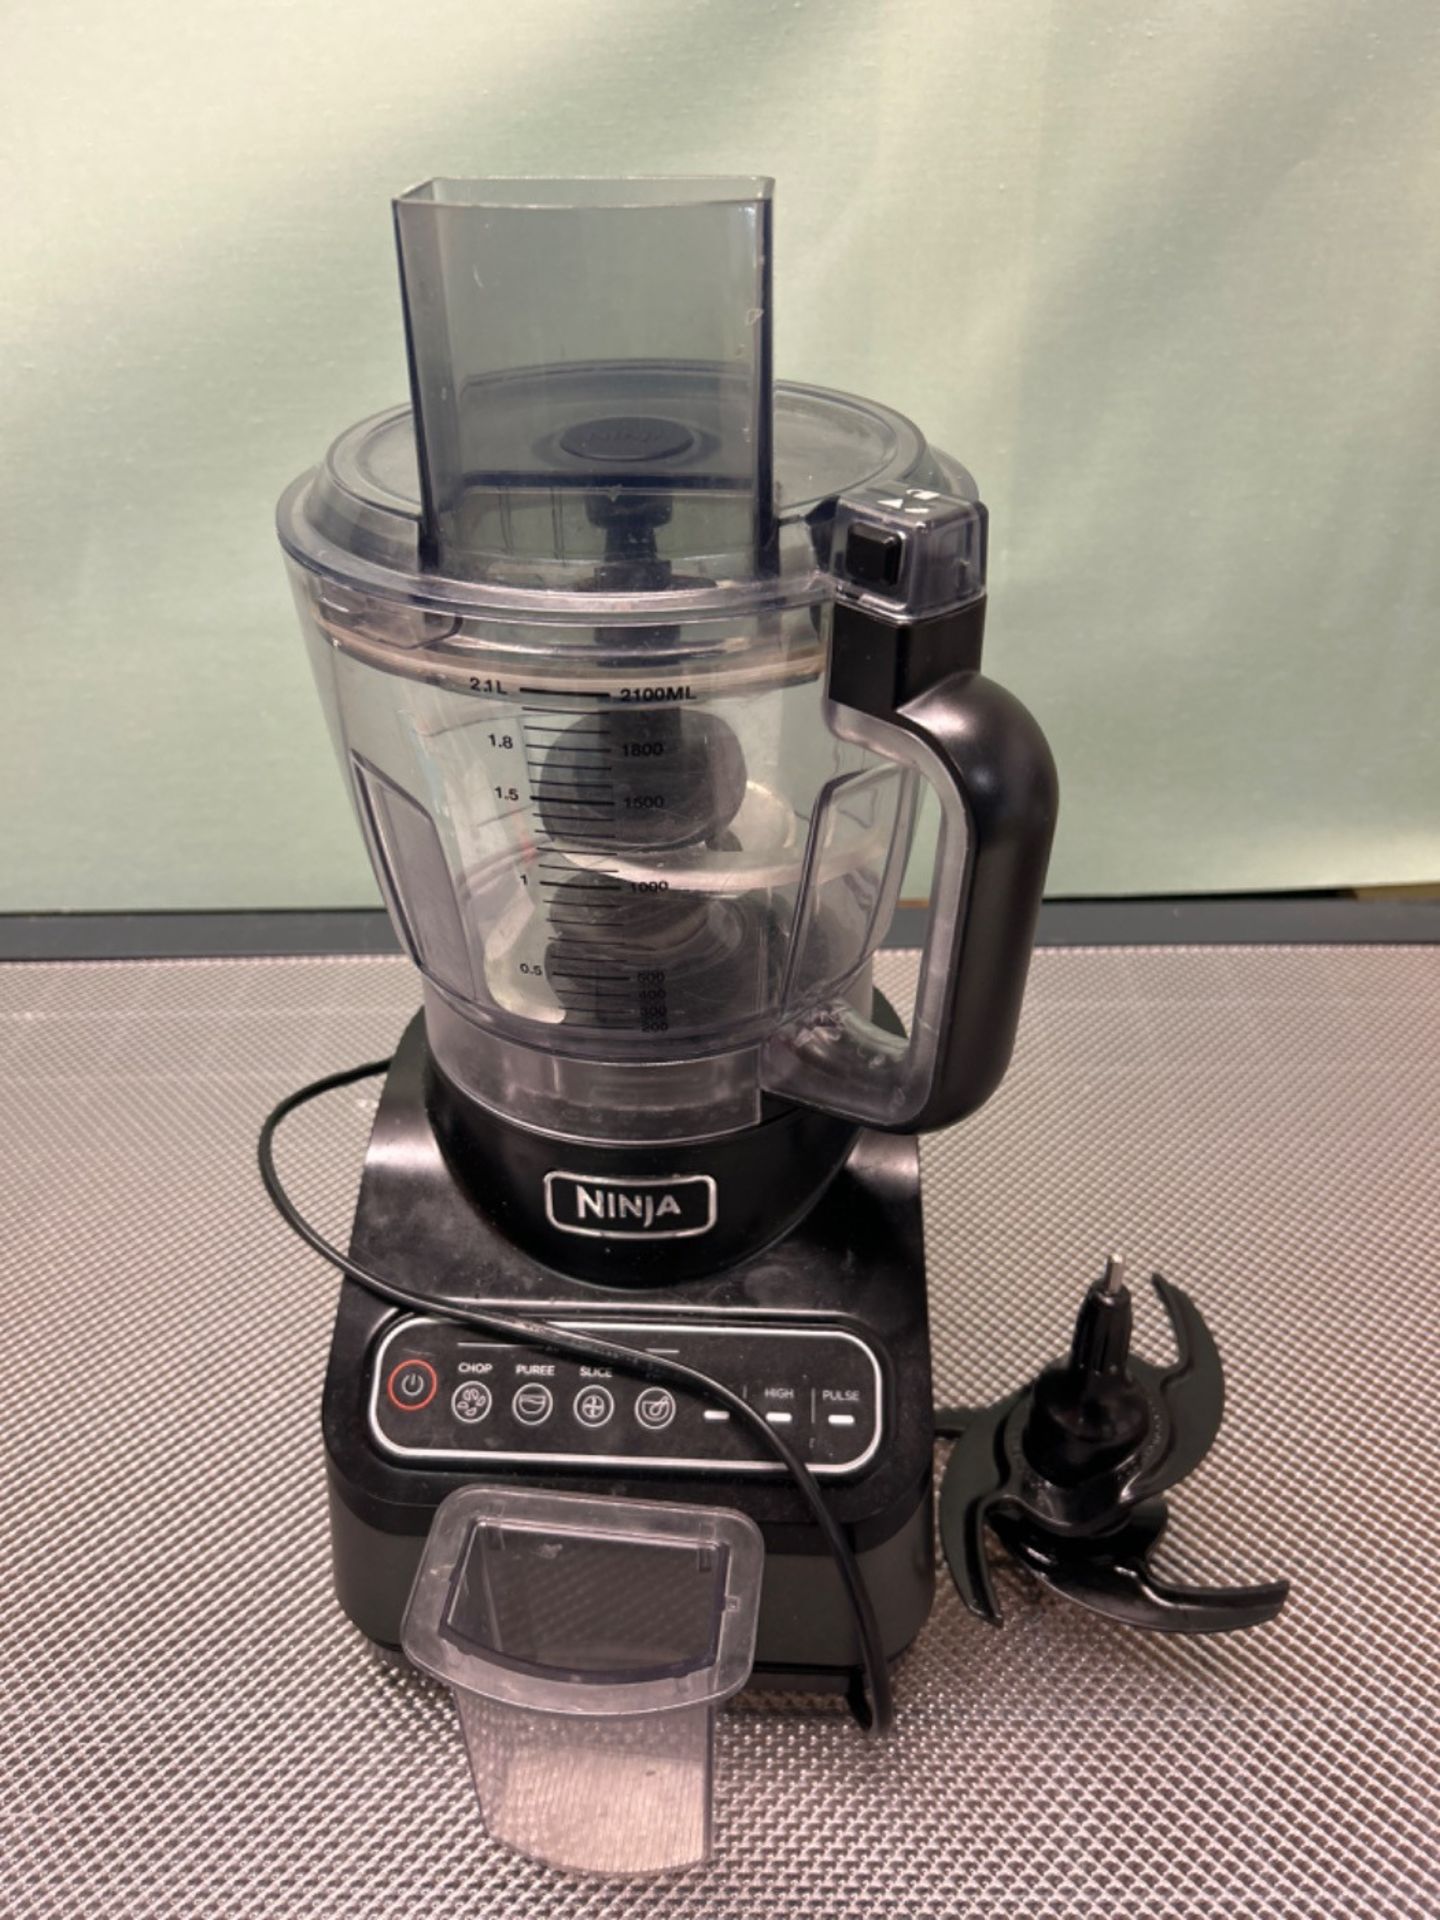 Ninja Food Processor with 4 Automatic Programs; Chop, Puree, Slice, Mix, and 3 Manual Speeds, 2.1L  - Image 2 of 3